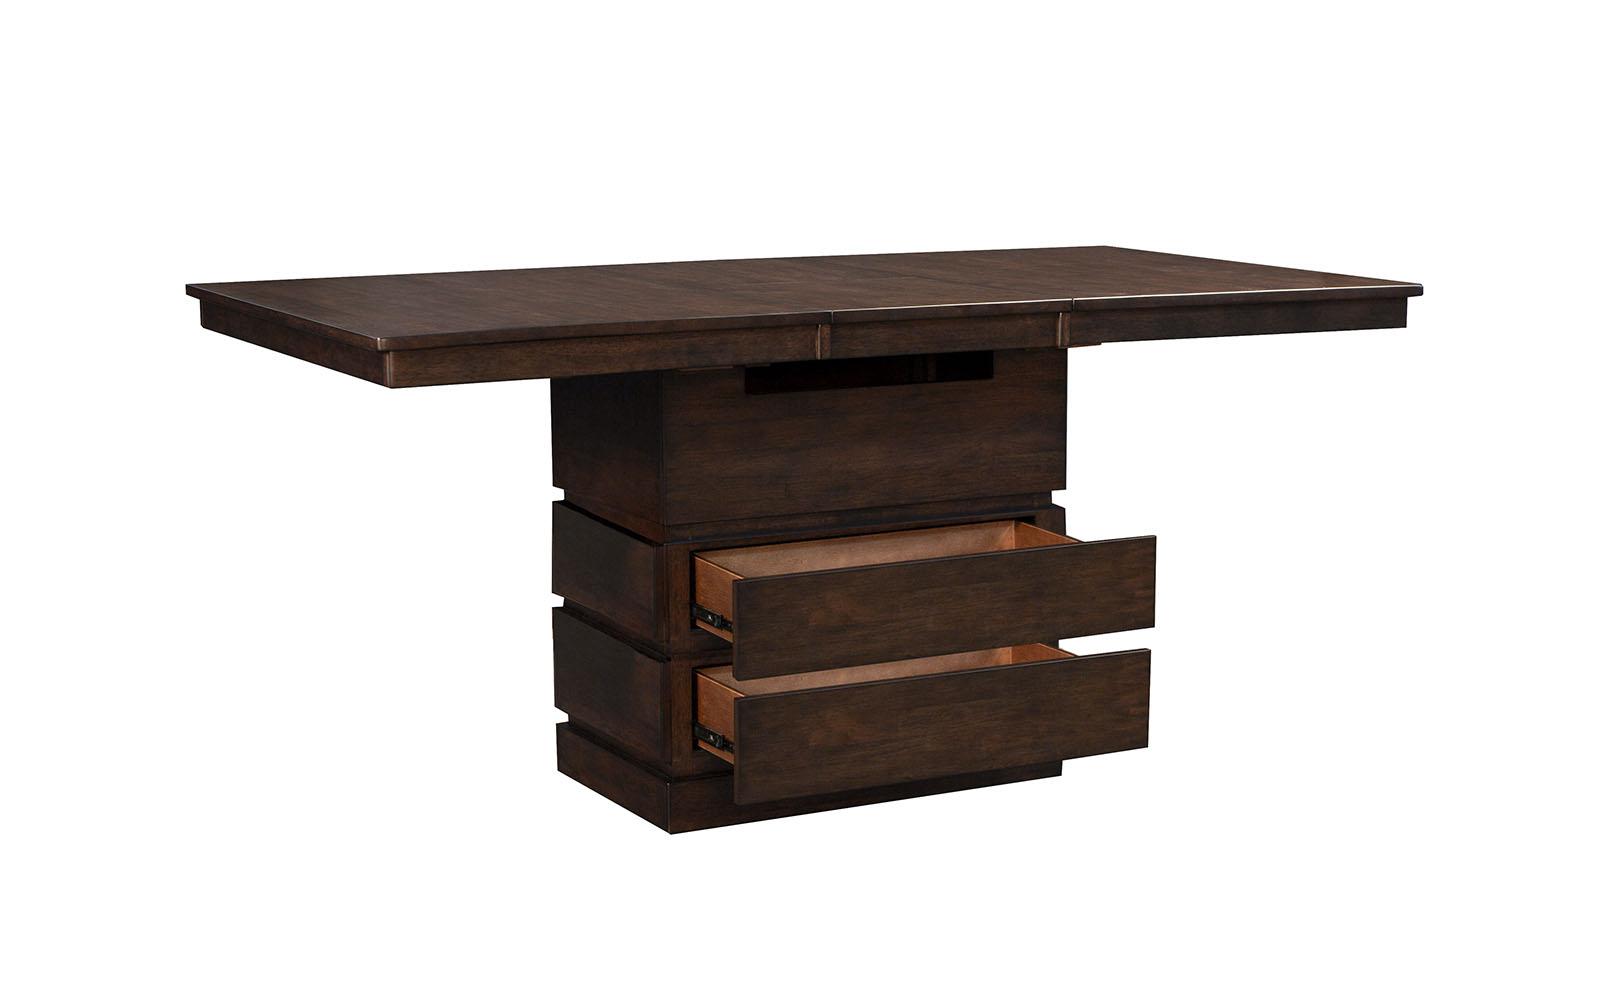 A America Chesney Dining Table